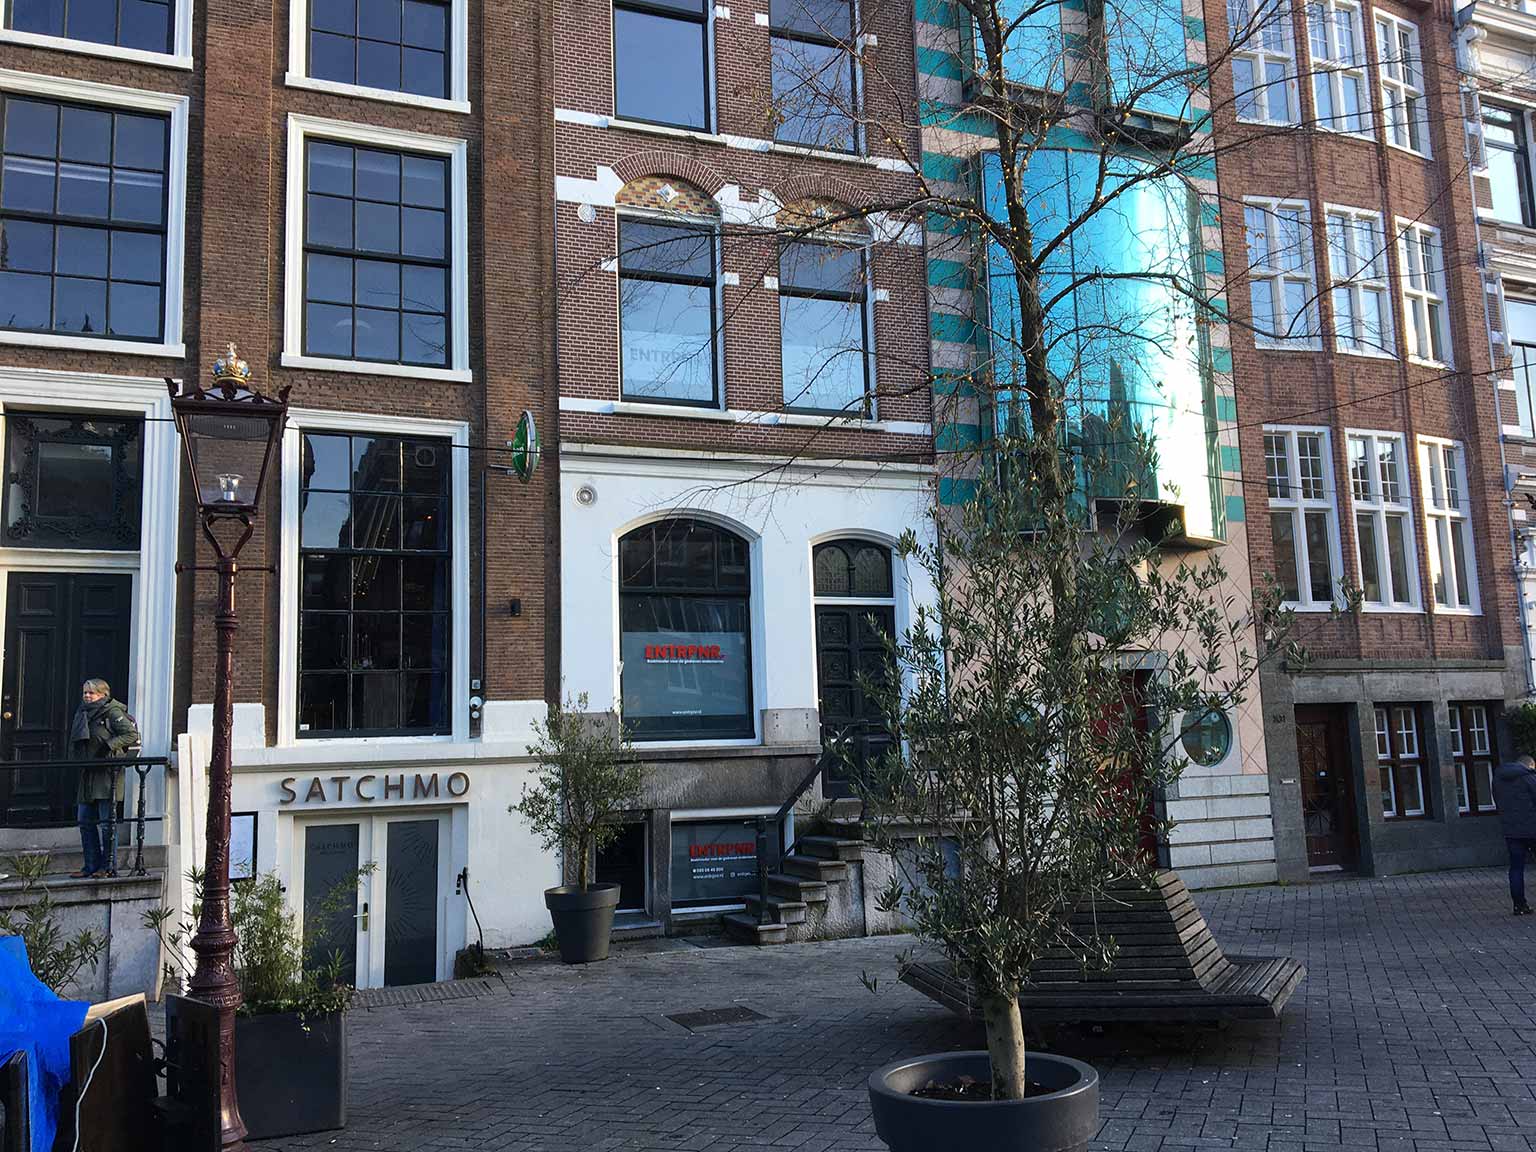 Rokin 95 to 101, Amsterdam, the entrance of Satchmo on the left